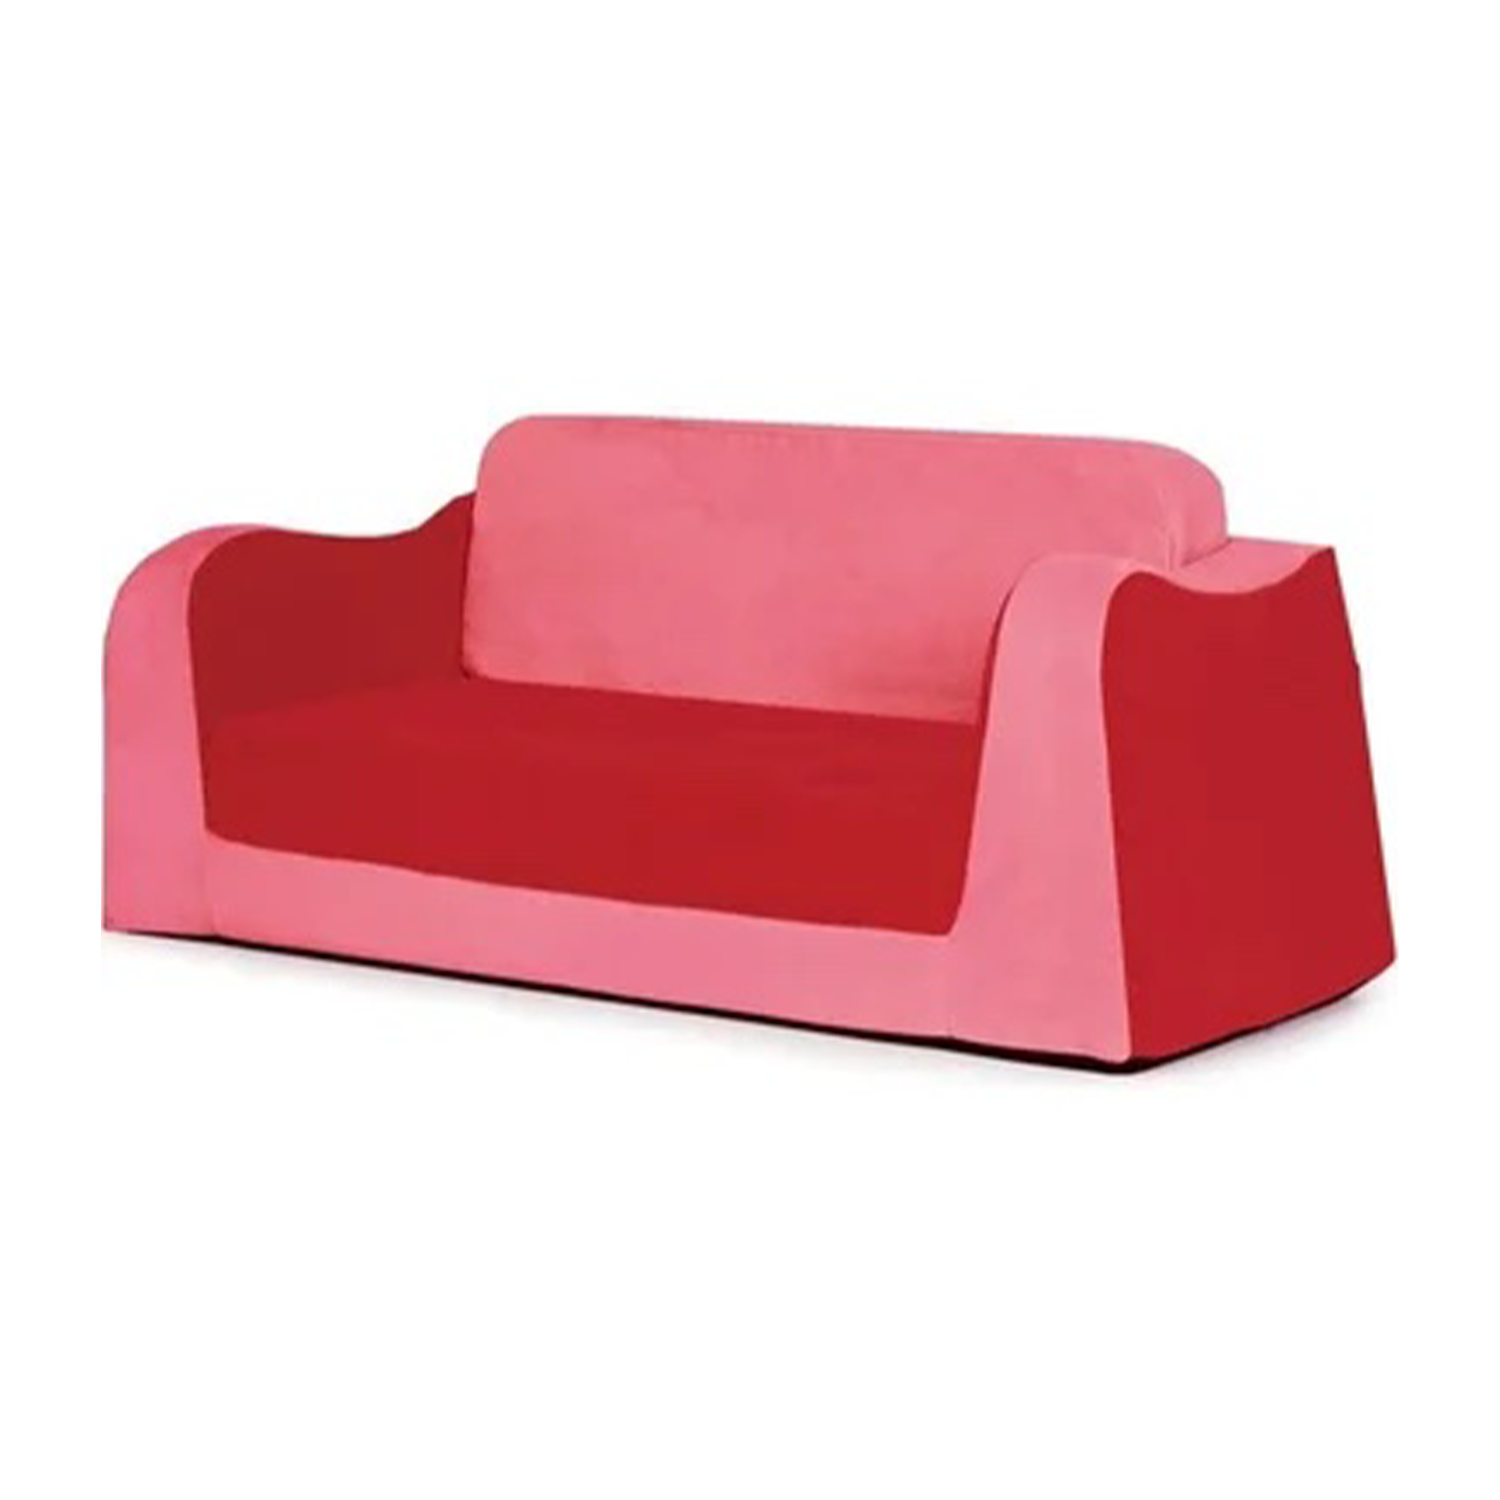 Little Reader chair in red